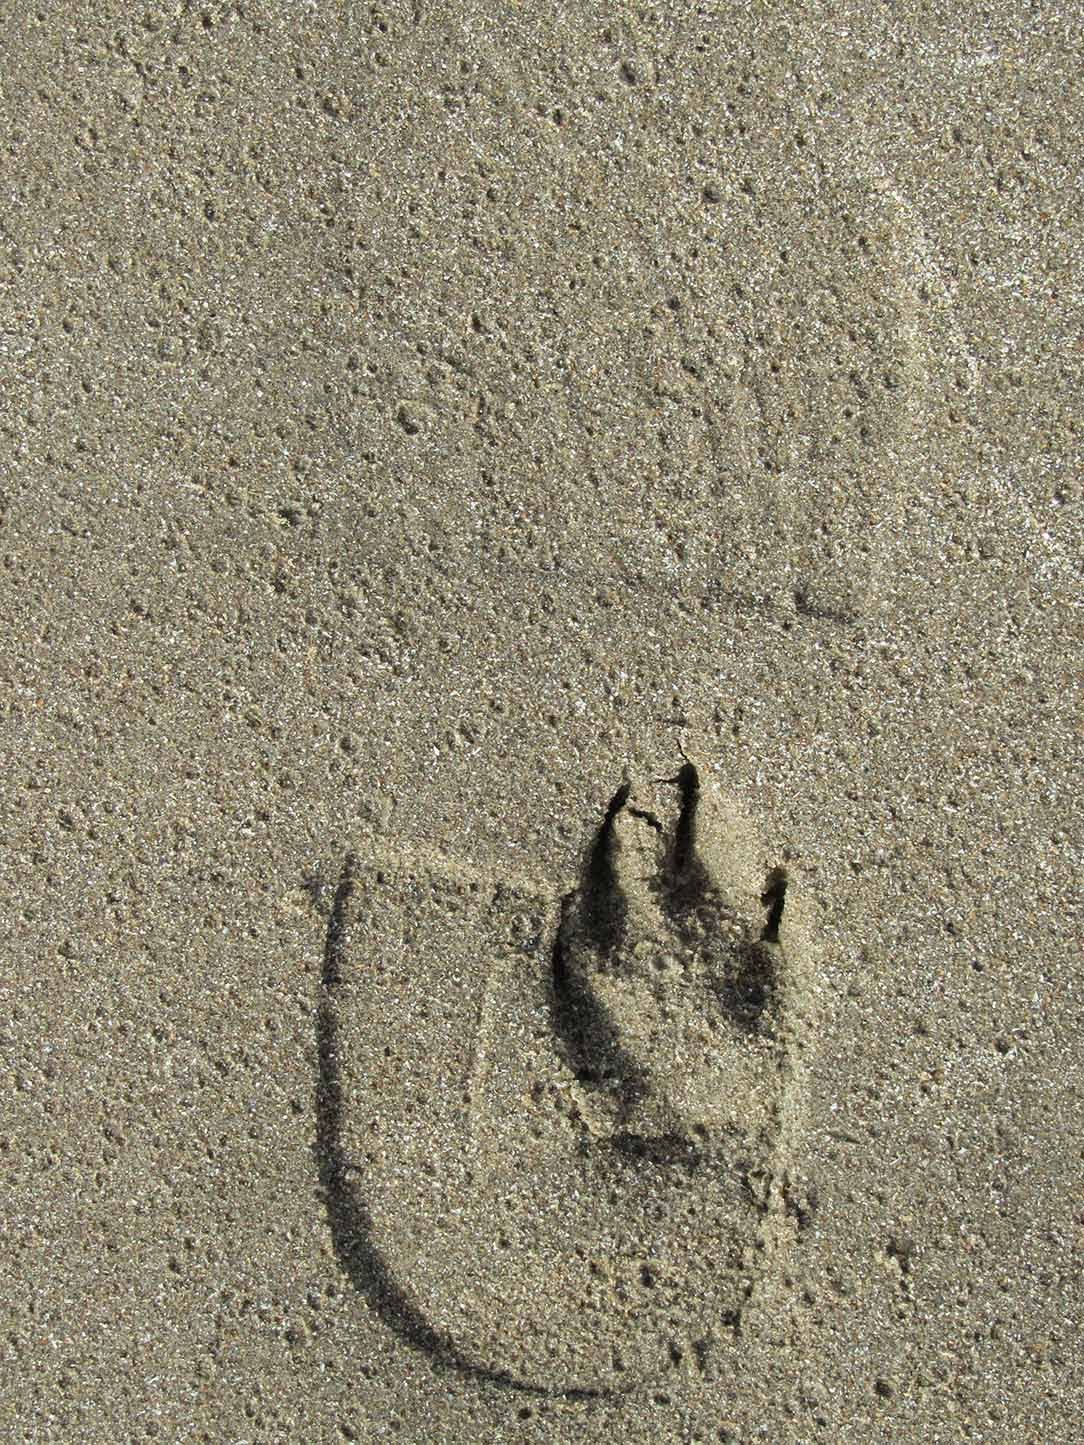 man's and dog's footsteps